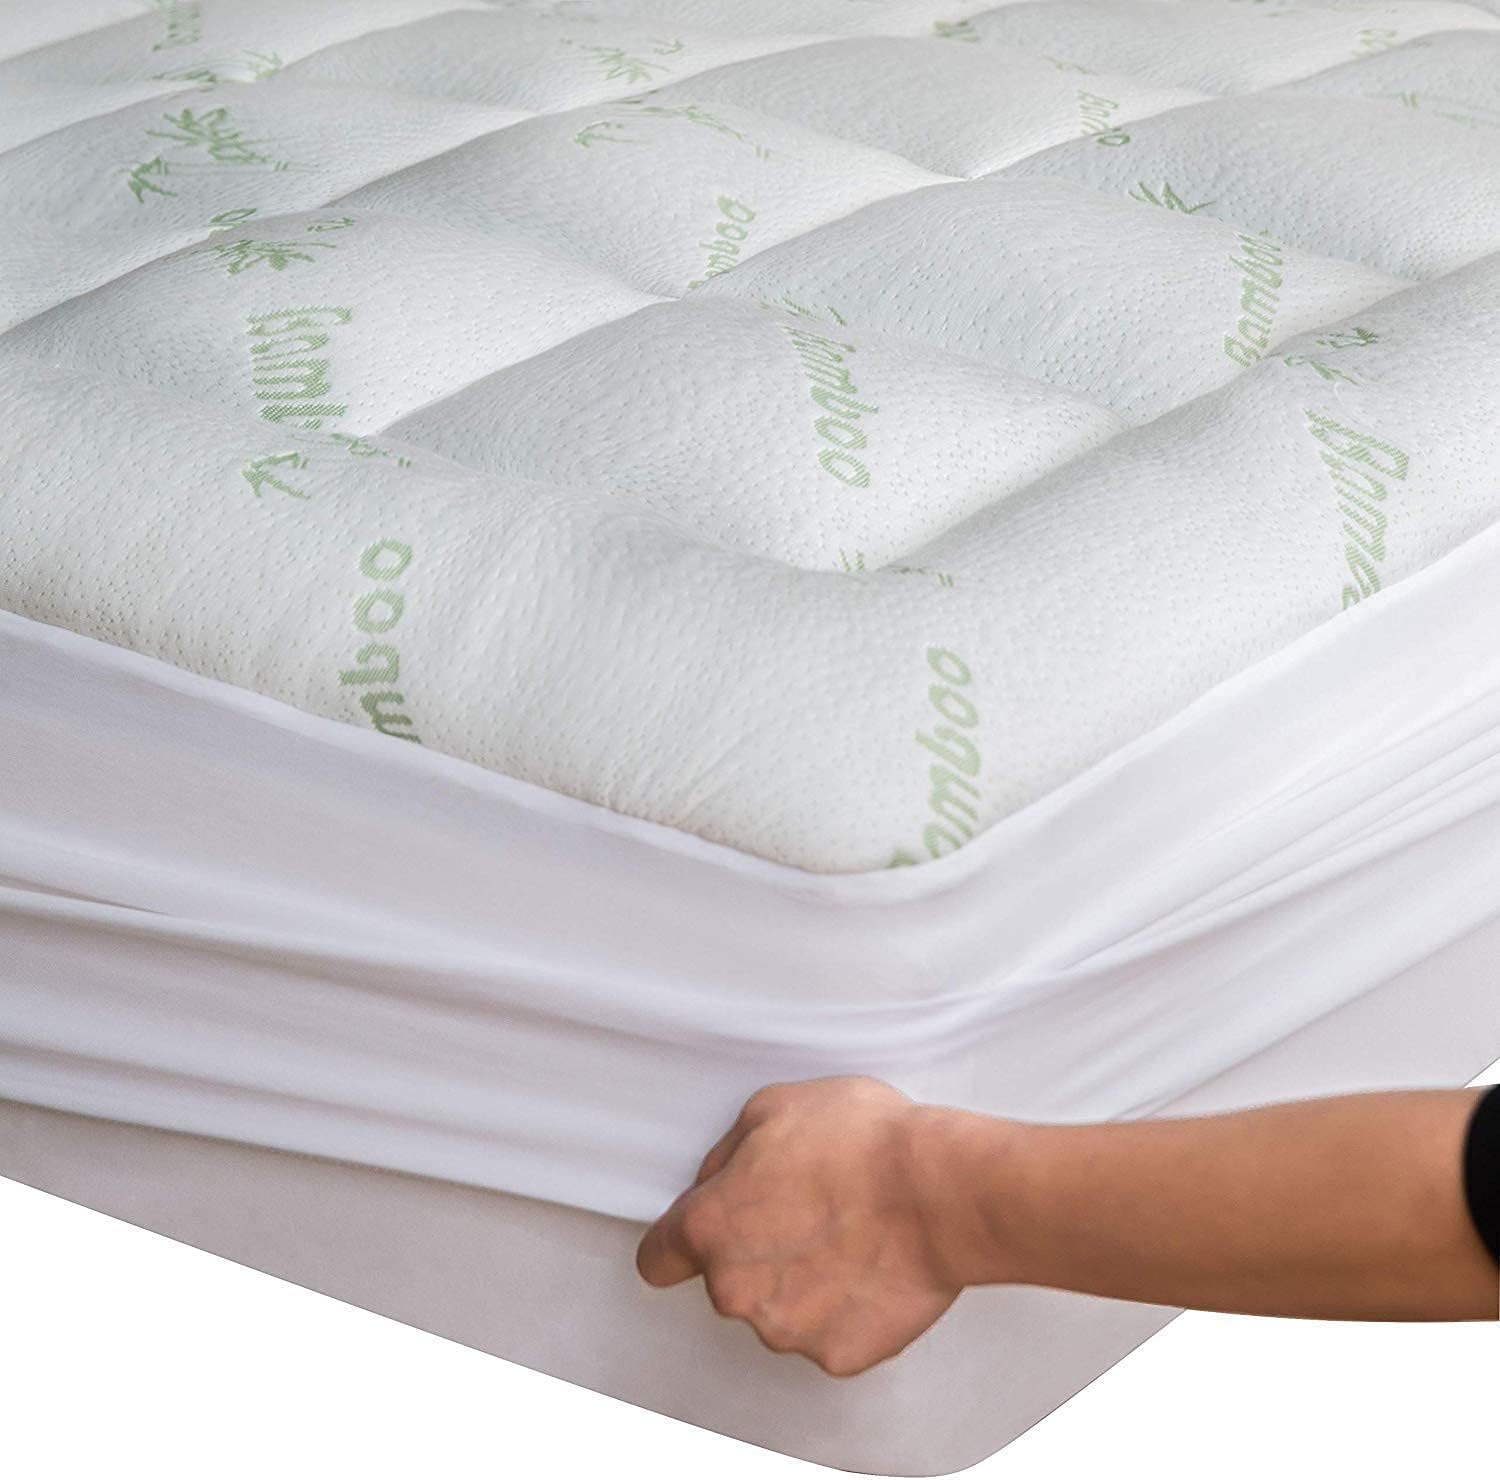 Bamboo Full XL Mattress Topper - Thick Cooling Breathable Pillow Top Mattress Pad for Back Pain Relief - Deep Pocket Topper Fits 8-20 Inches Mattress (Viscose Made from Bamboo, 54x80 Inches)